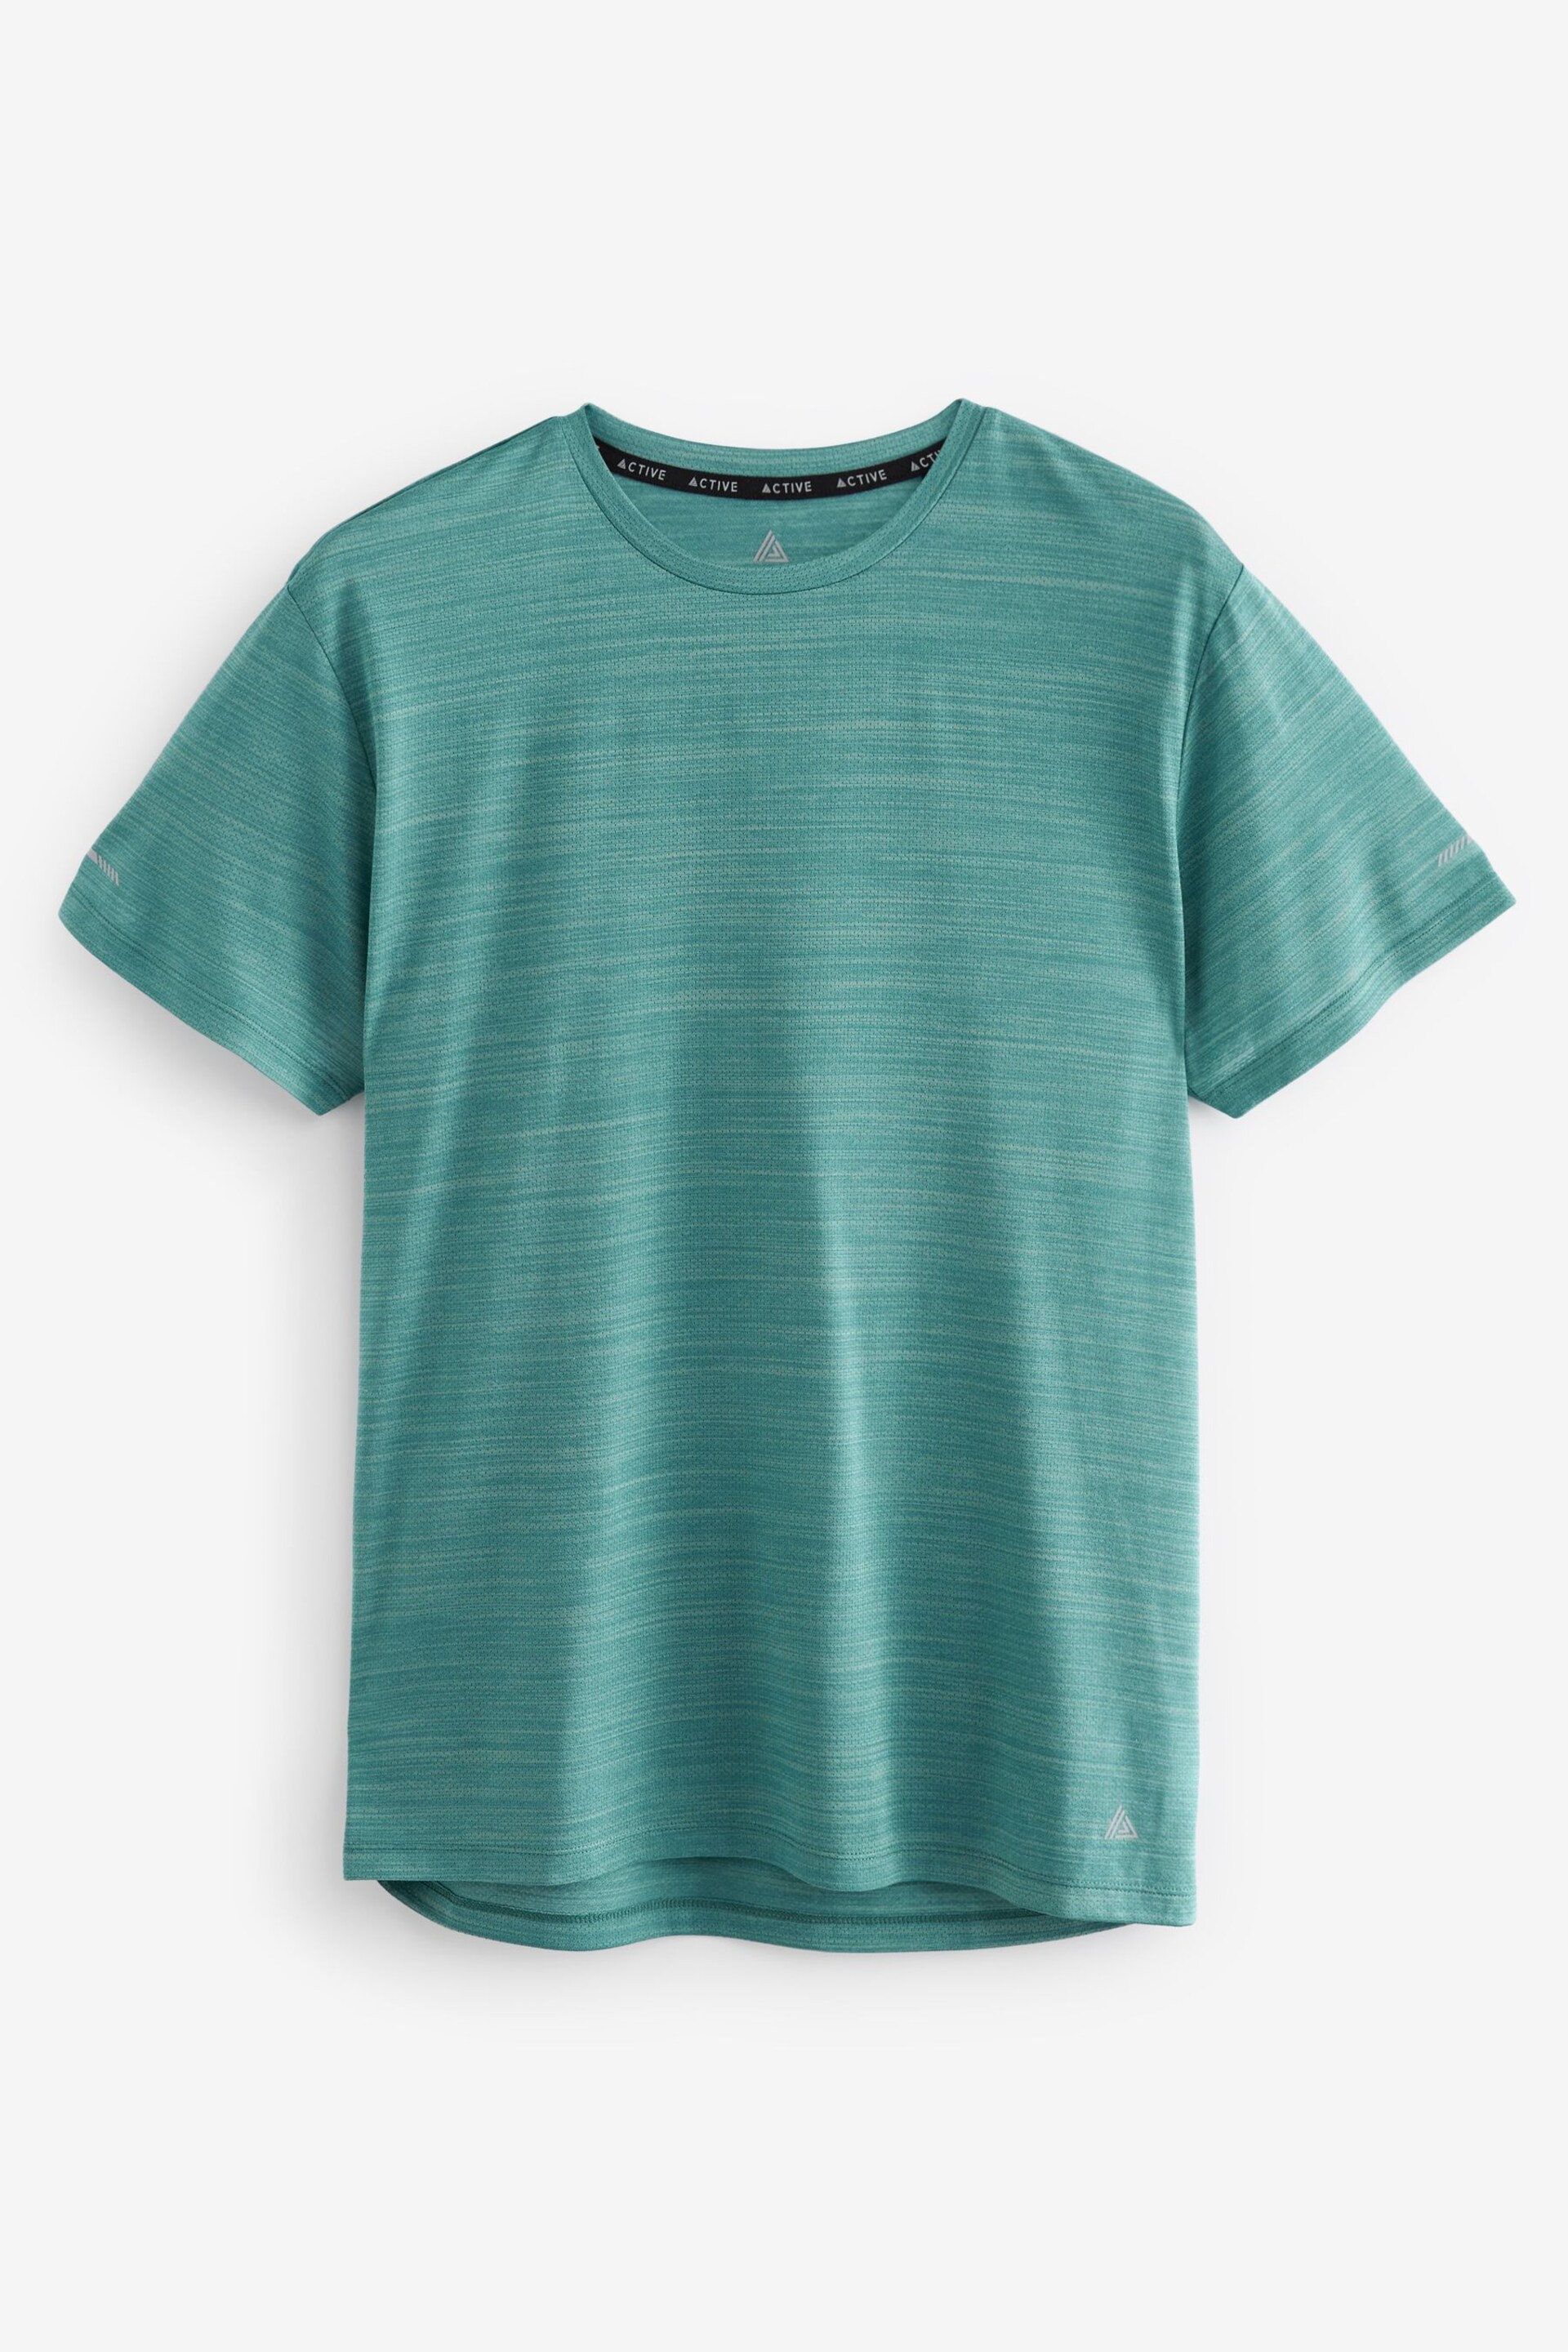 Teal Blue Active Mesh Training T-Shirt - Image 6 of 8